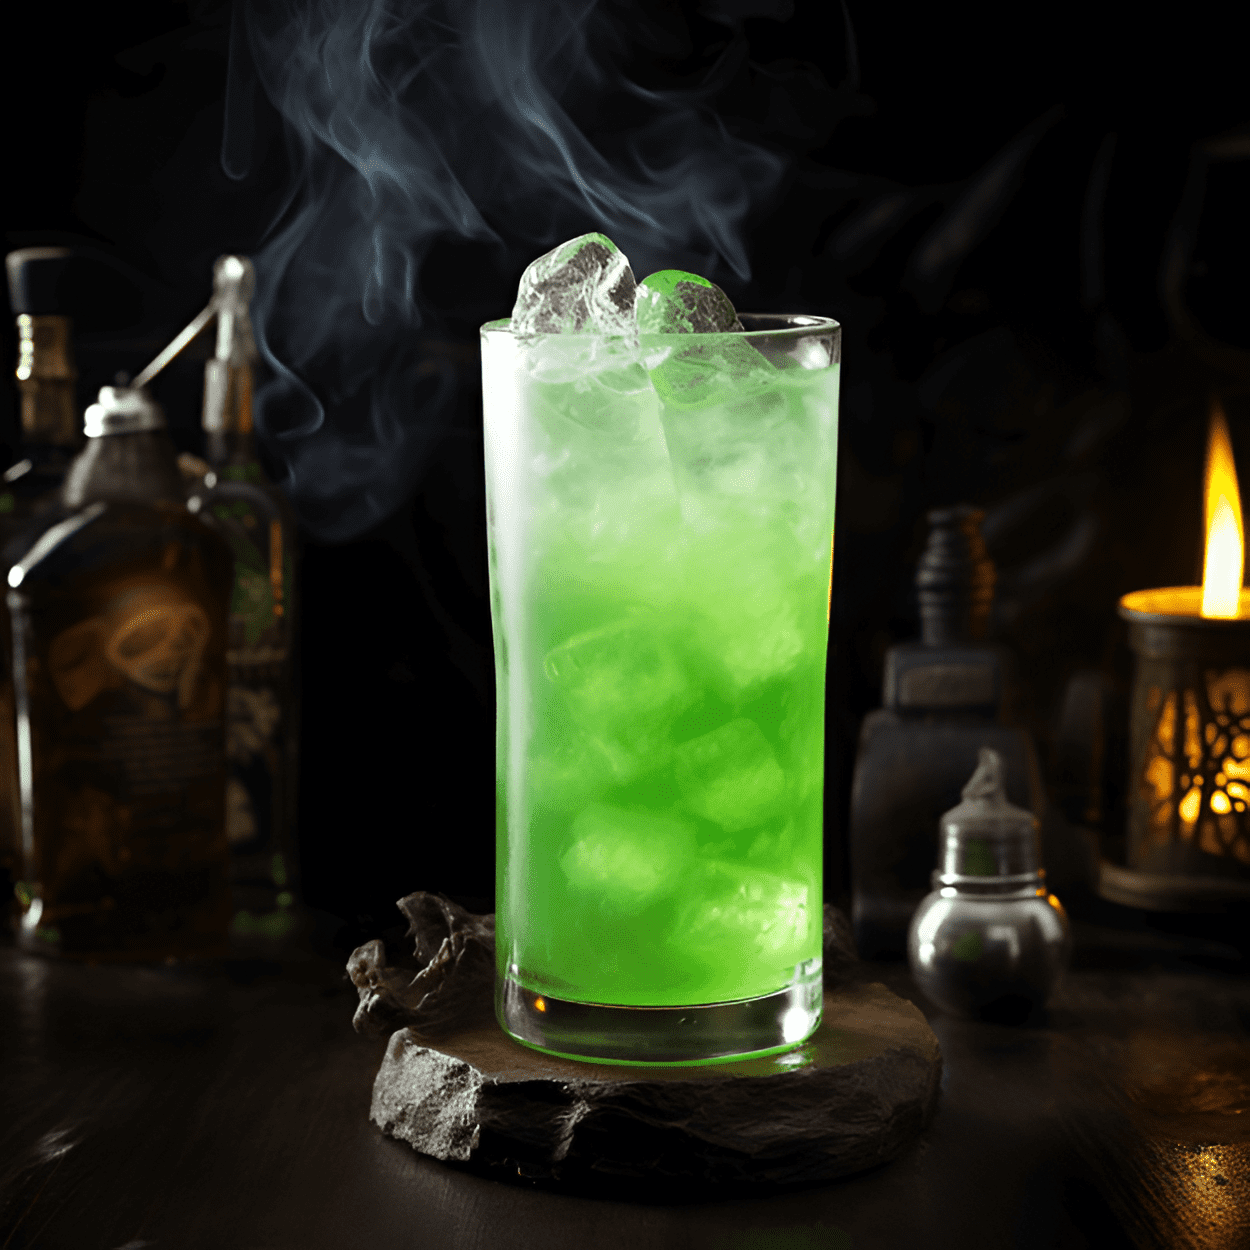 Frankenstein Cocktail Recipe - The Frankenstein cocktail is a balanced mix of sweet, sour, and slightly bitter flavors. The combination of melon liqueur, lime juice, and ginger beer creates a refreshing and invigorating taste, while the vodka adds a subtle kick.